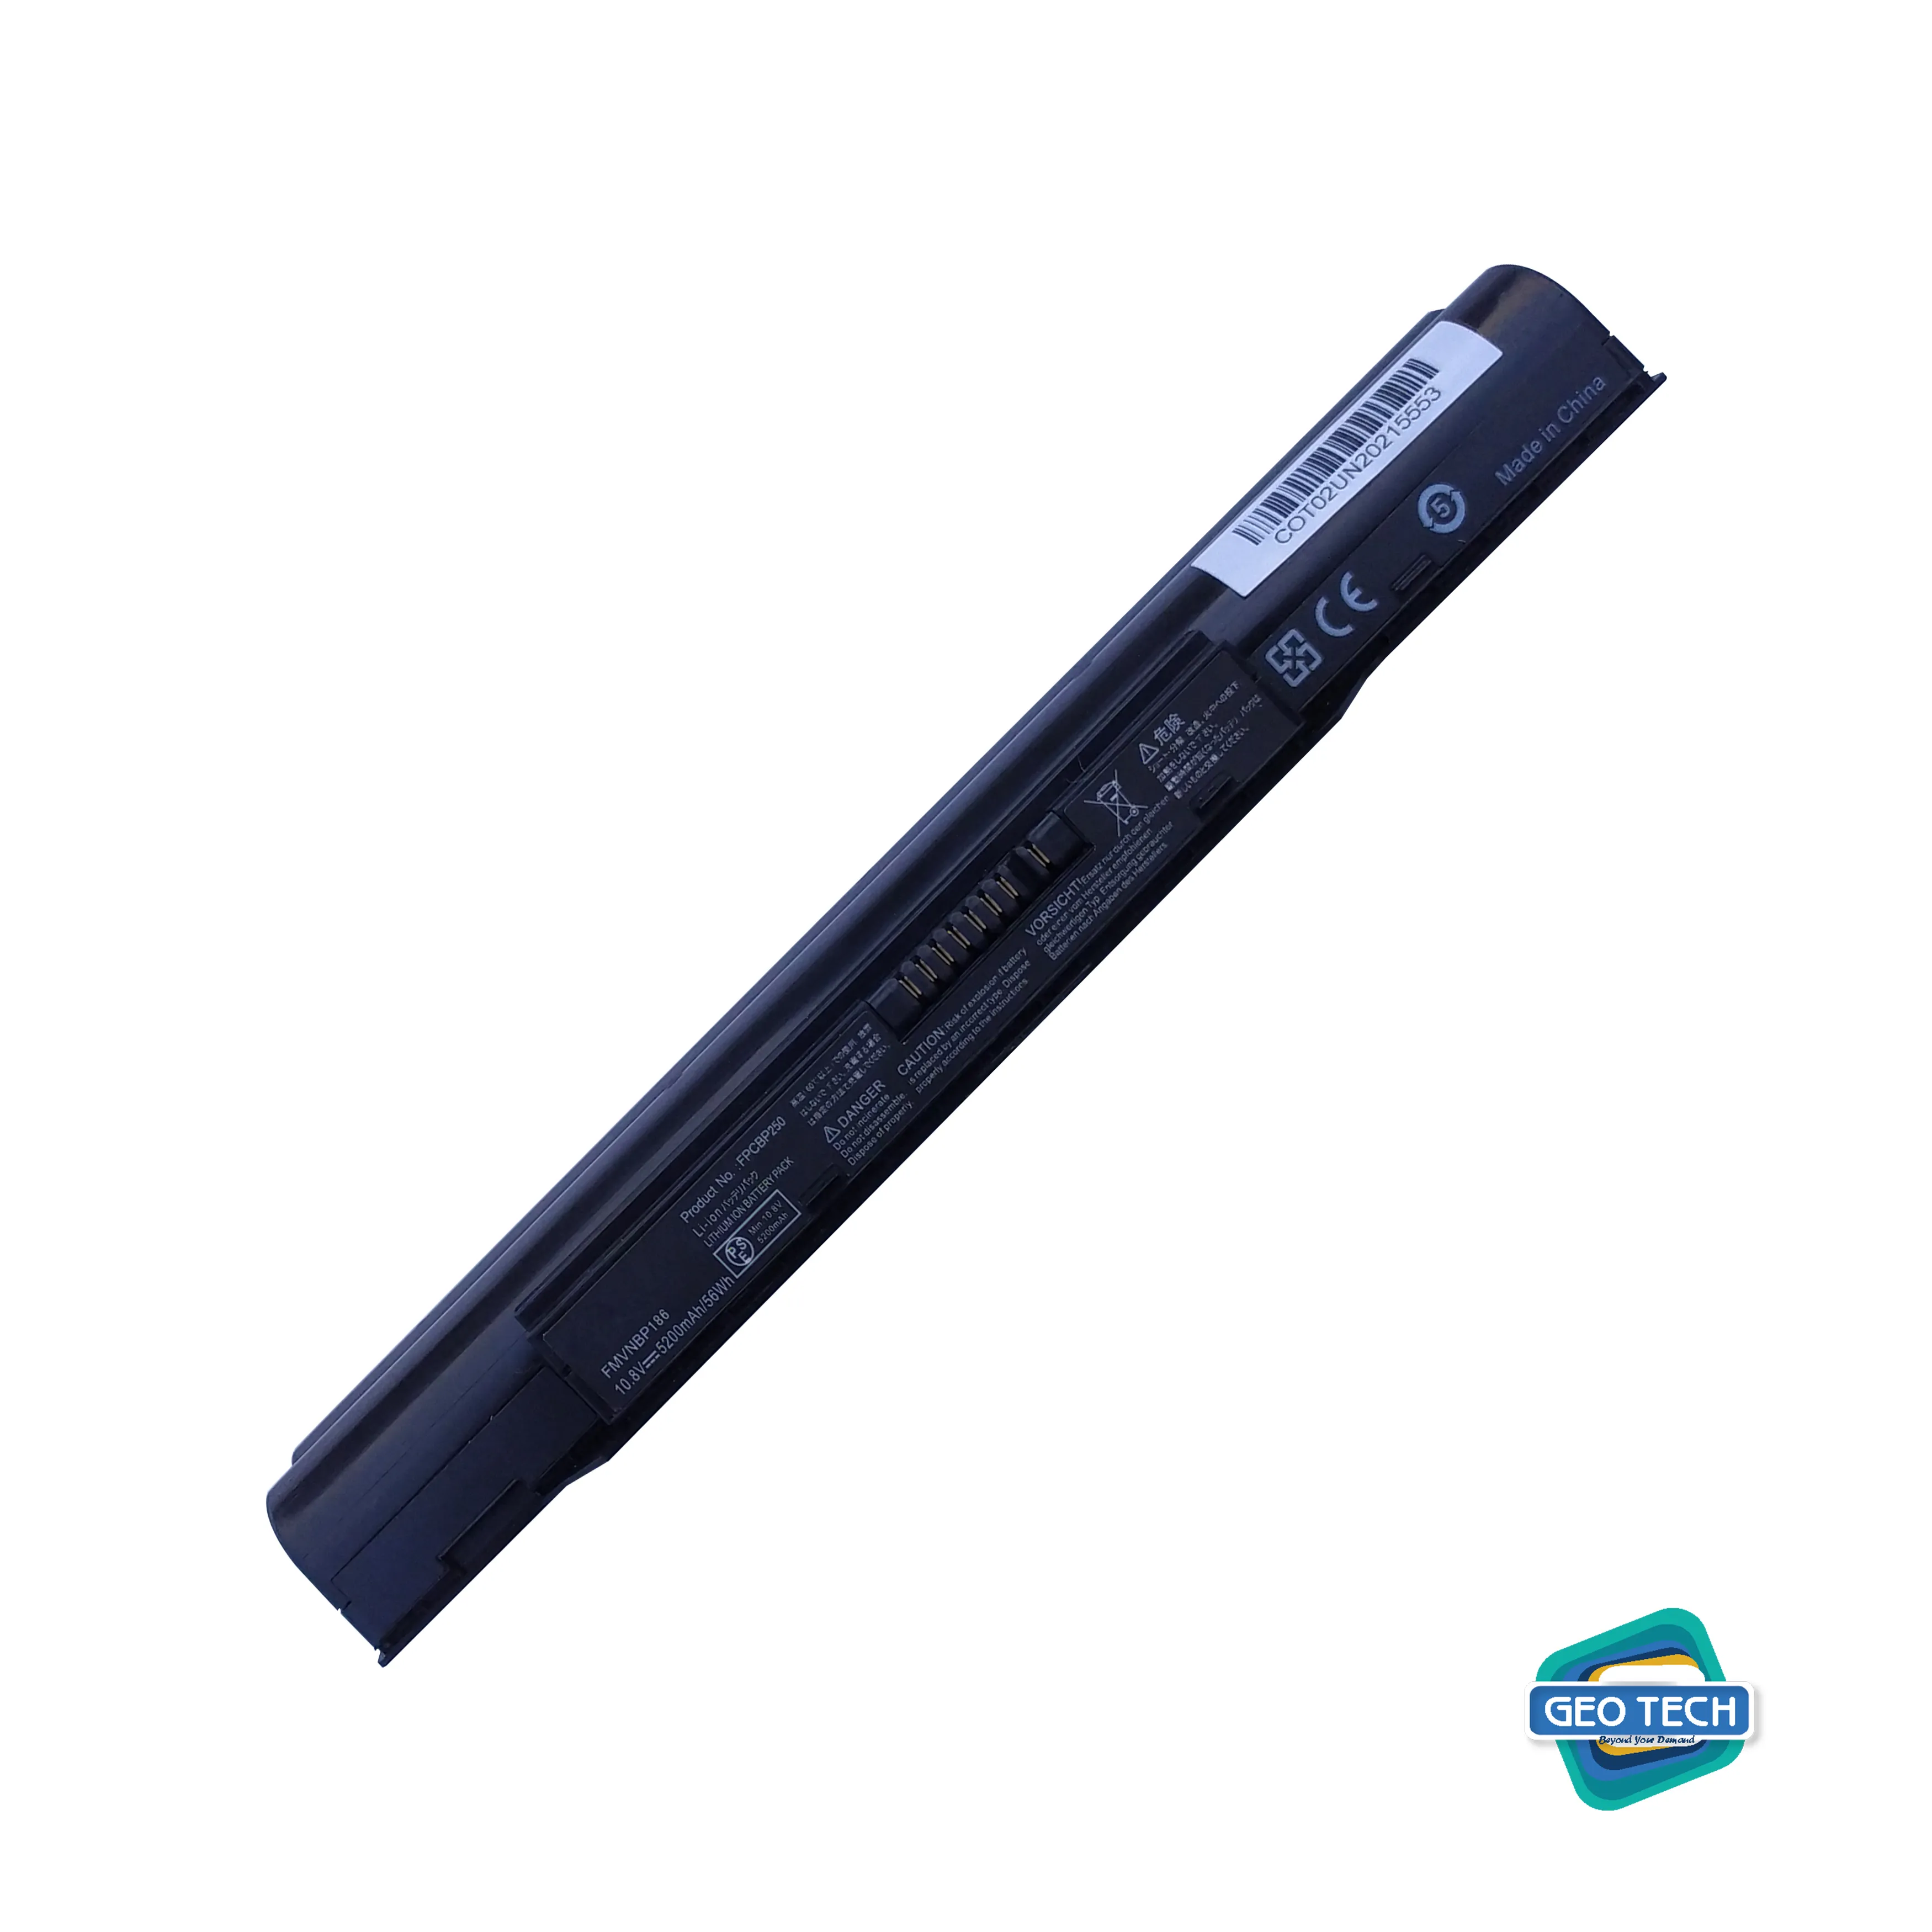 Lh530 laptop battery for FUJITSU LifeBook A530 A531 AH42/E AH530 AH530/3A AH531 LH52/C LH520 LH522 LH530 LH701 LH701A PH50/C OEM BATTERY